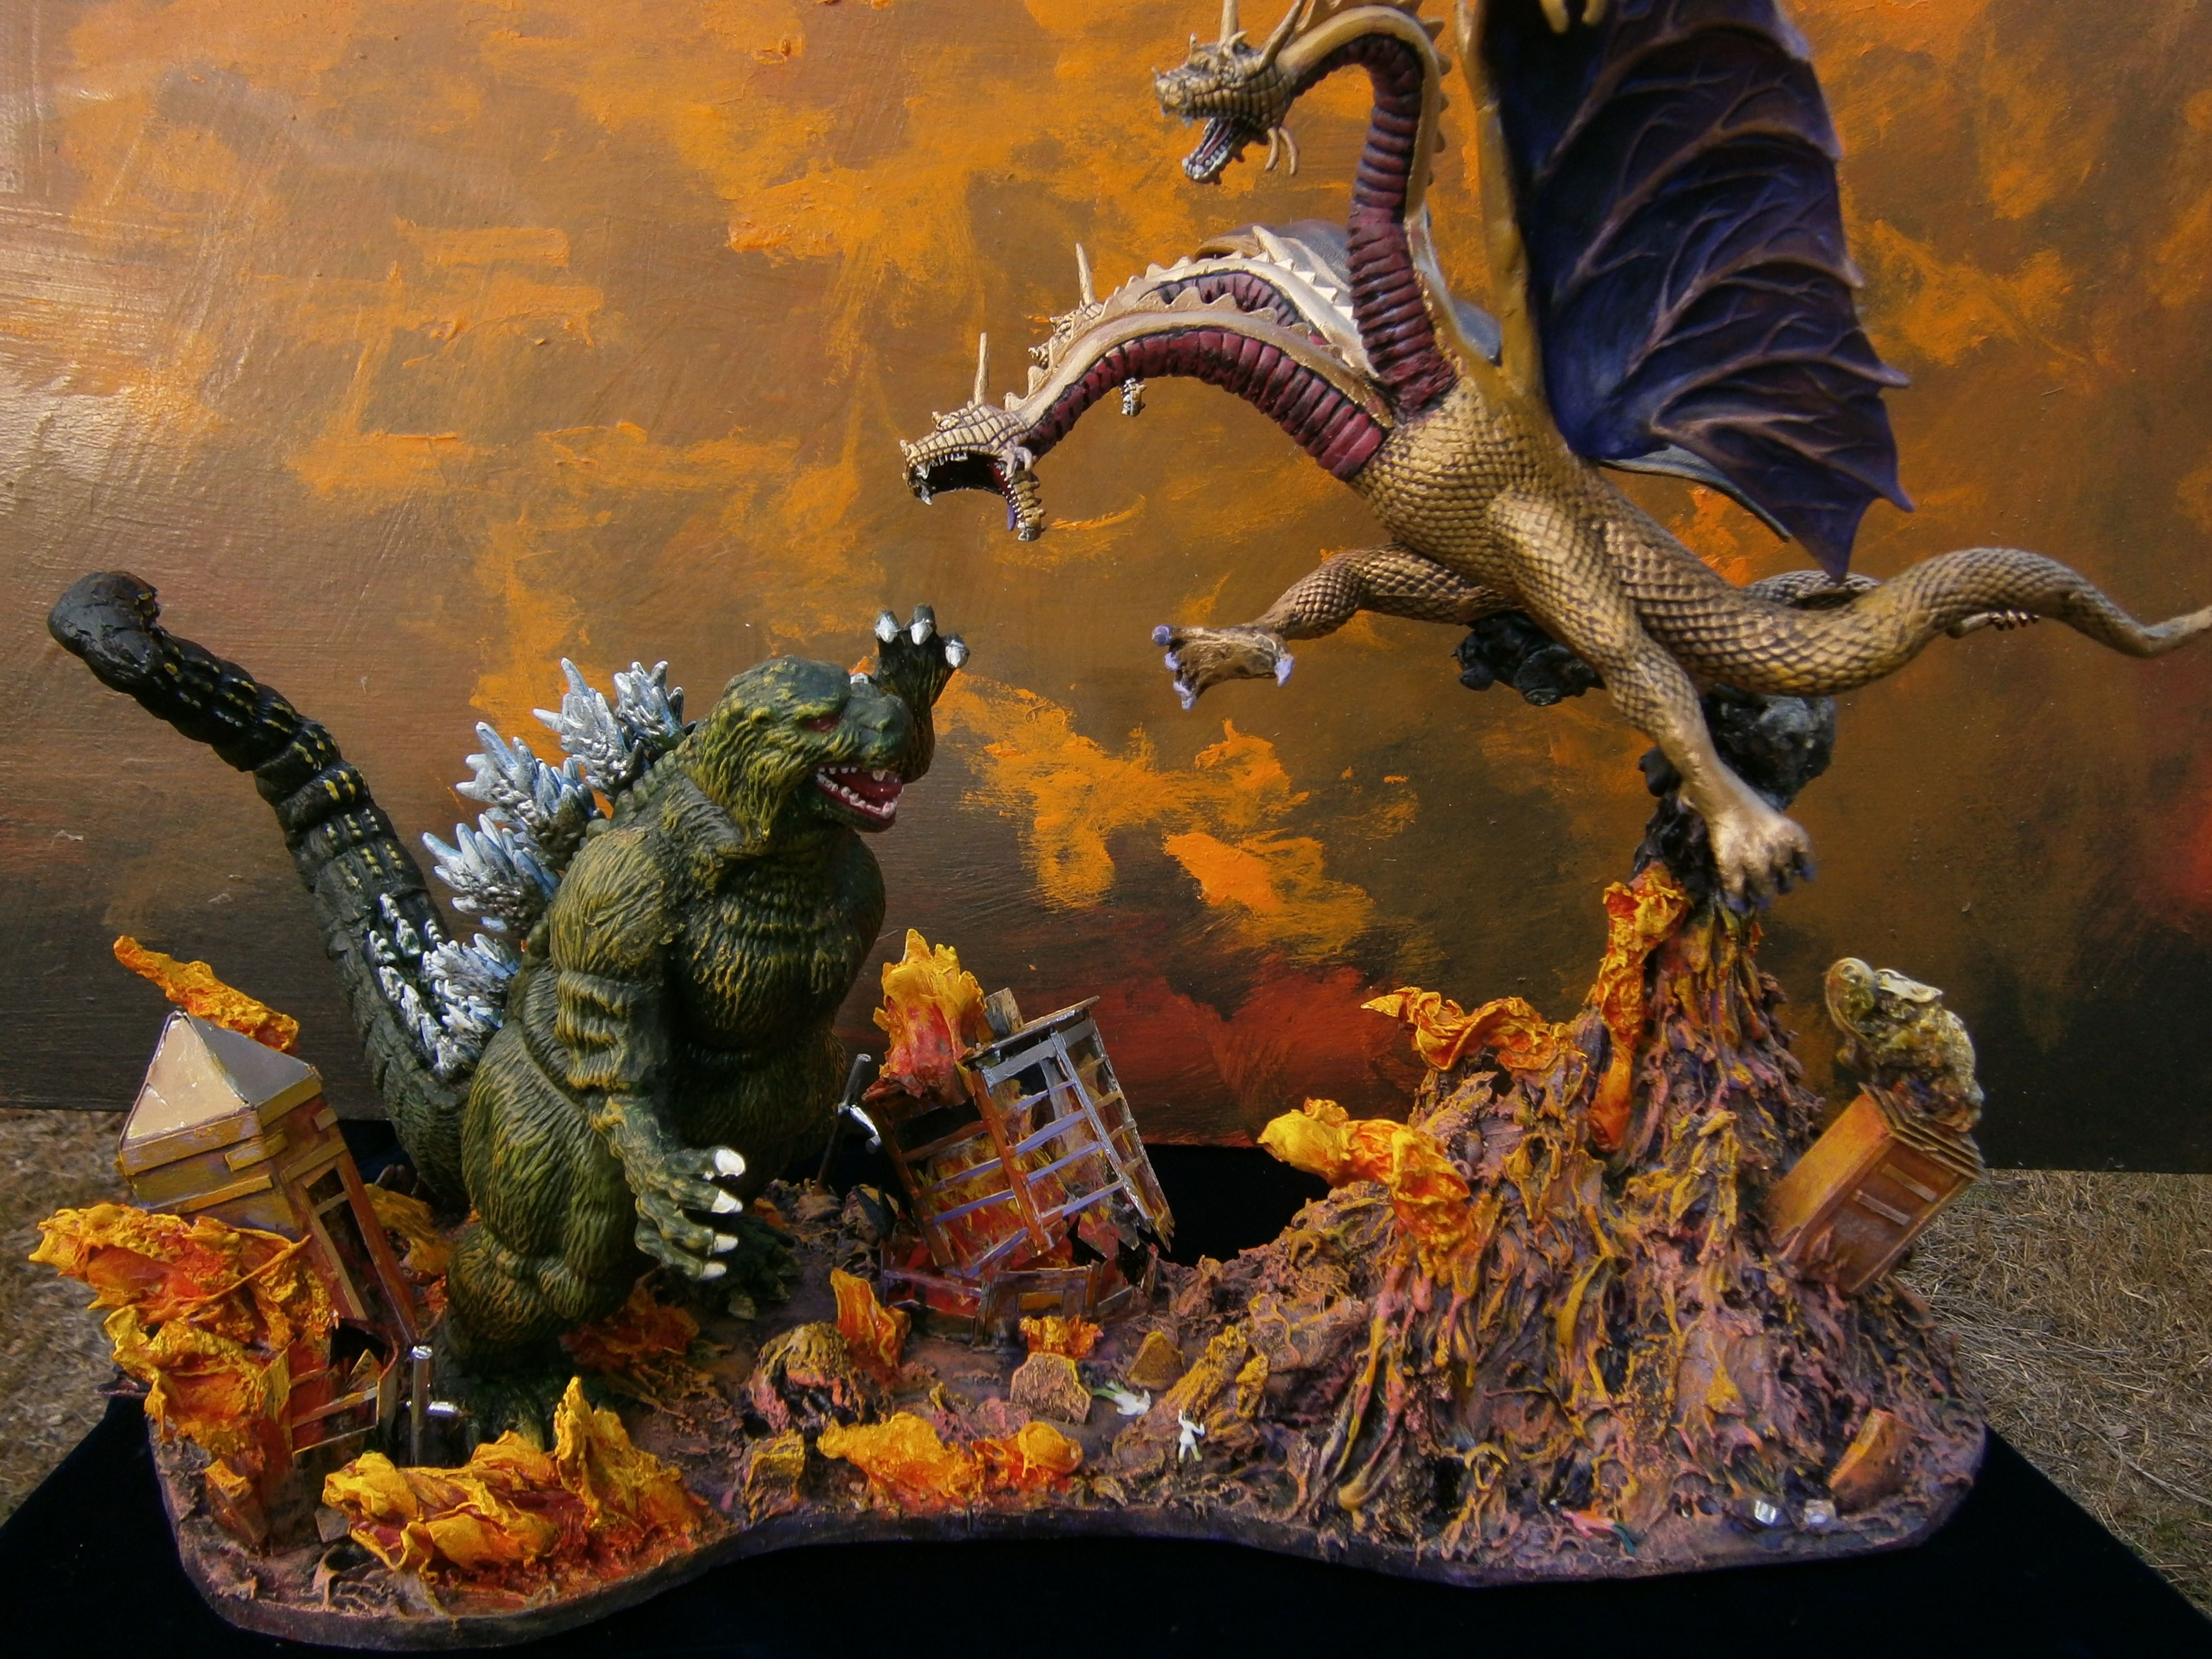 K godzilla vs king ghidorah papers background images